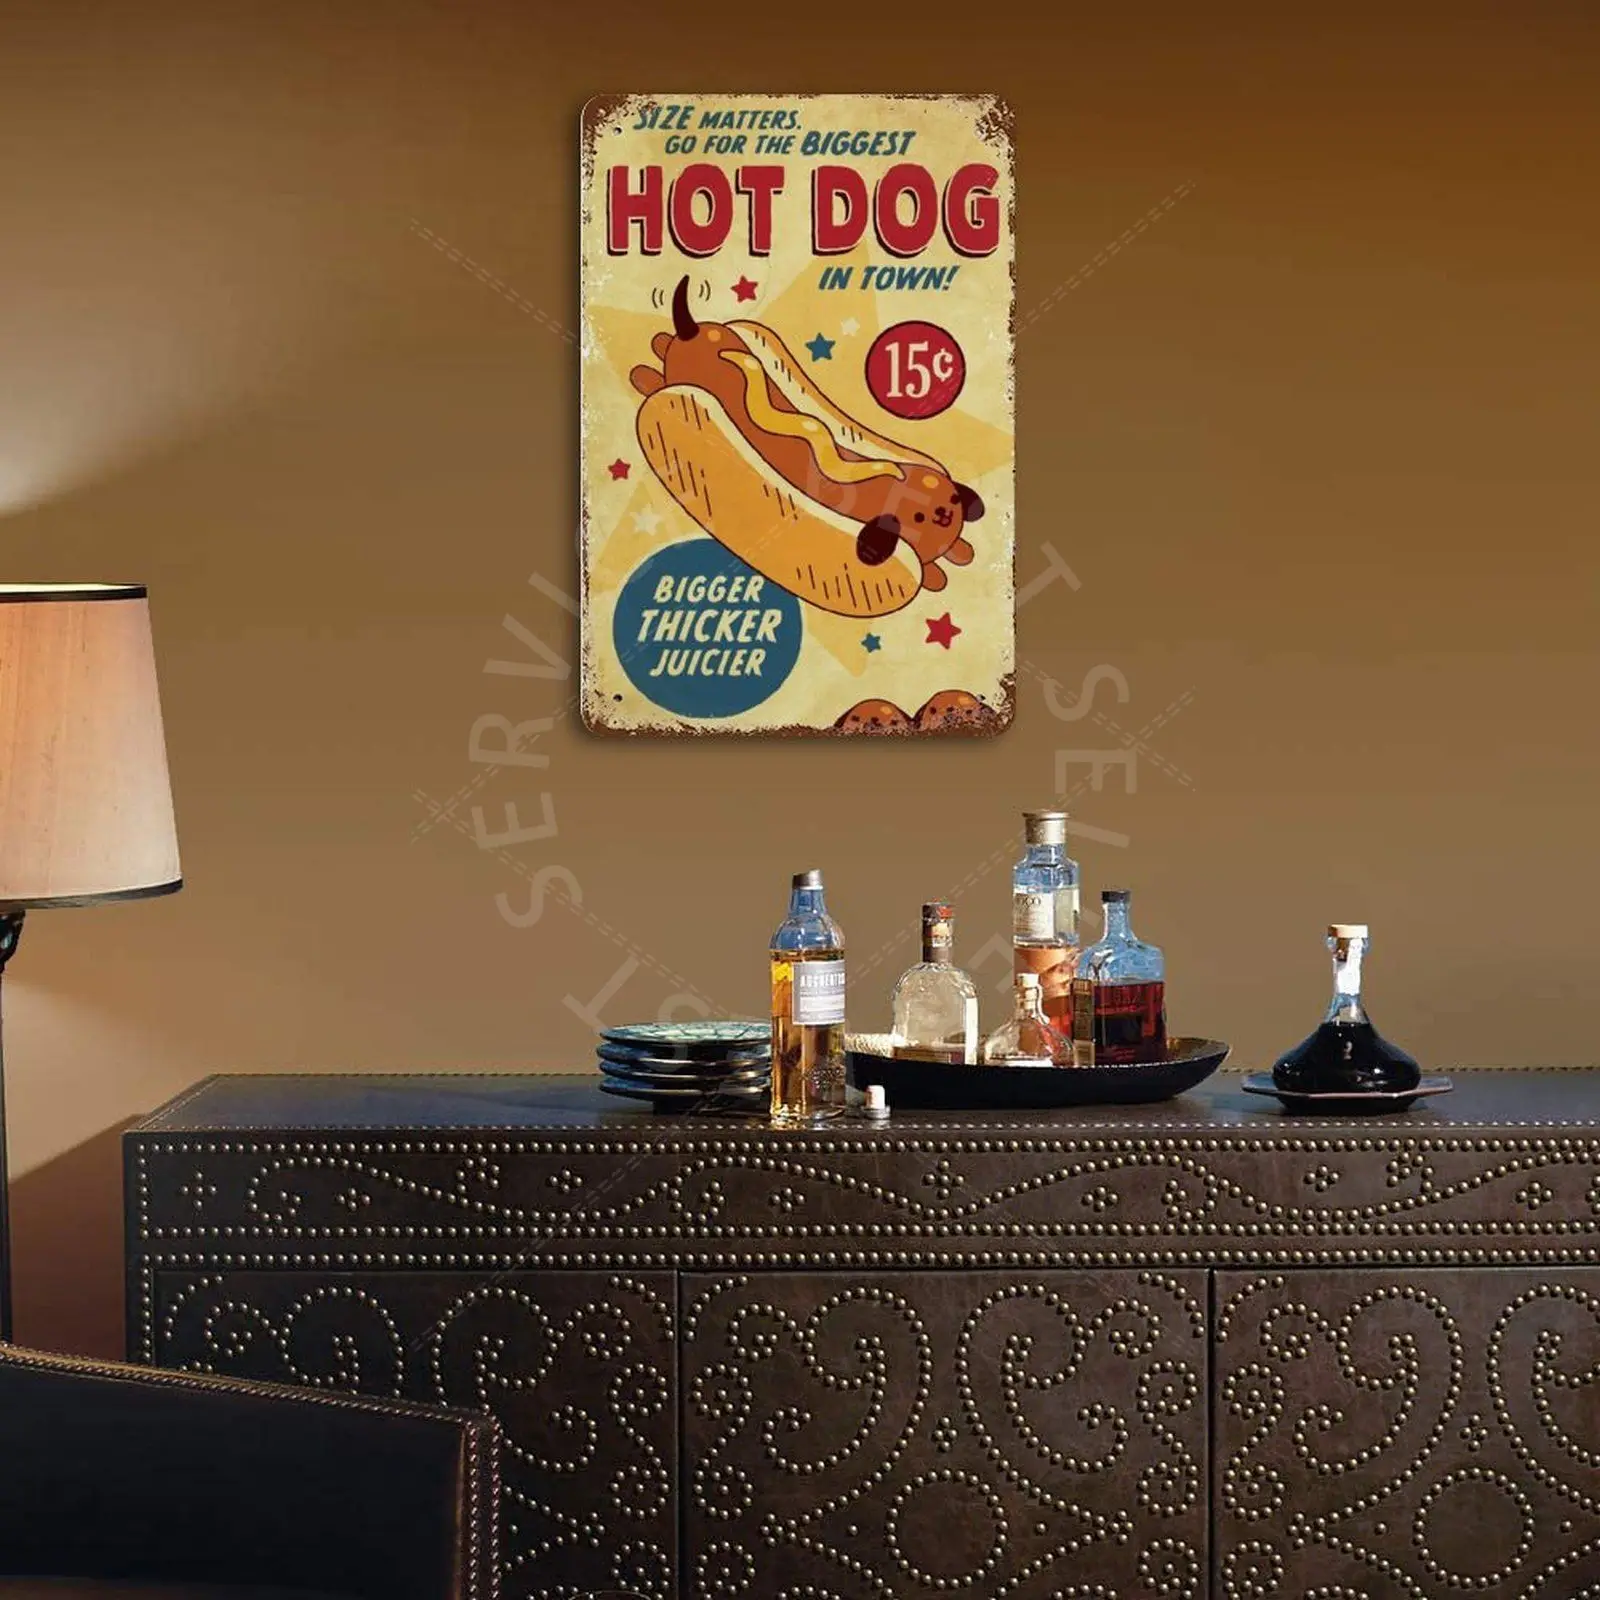 

Hot Dog In Town Vintage Metal Plaque Sign Bar Home Wall Decor Signs Retro Metal Poster Tin Sign Man Cave pub Kitchen Plates